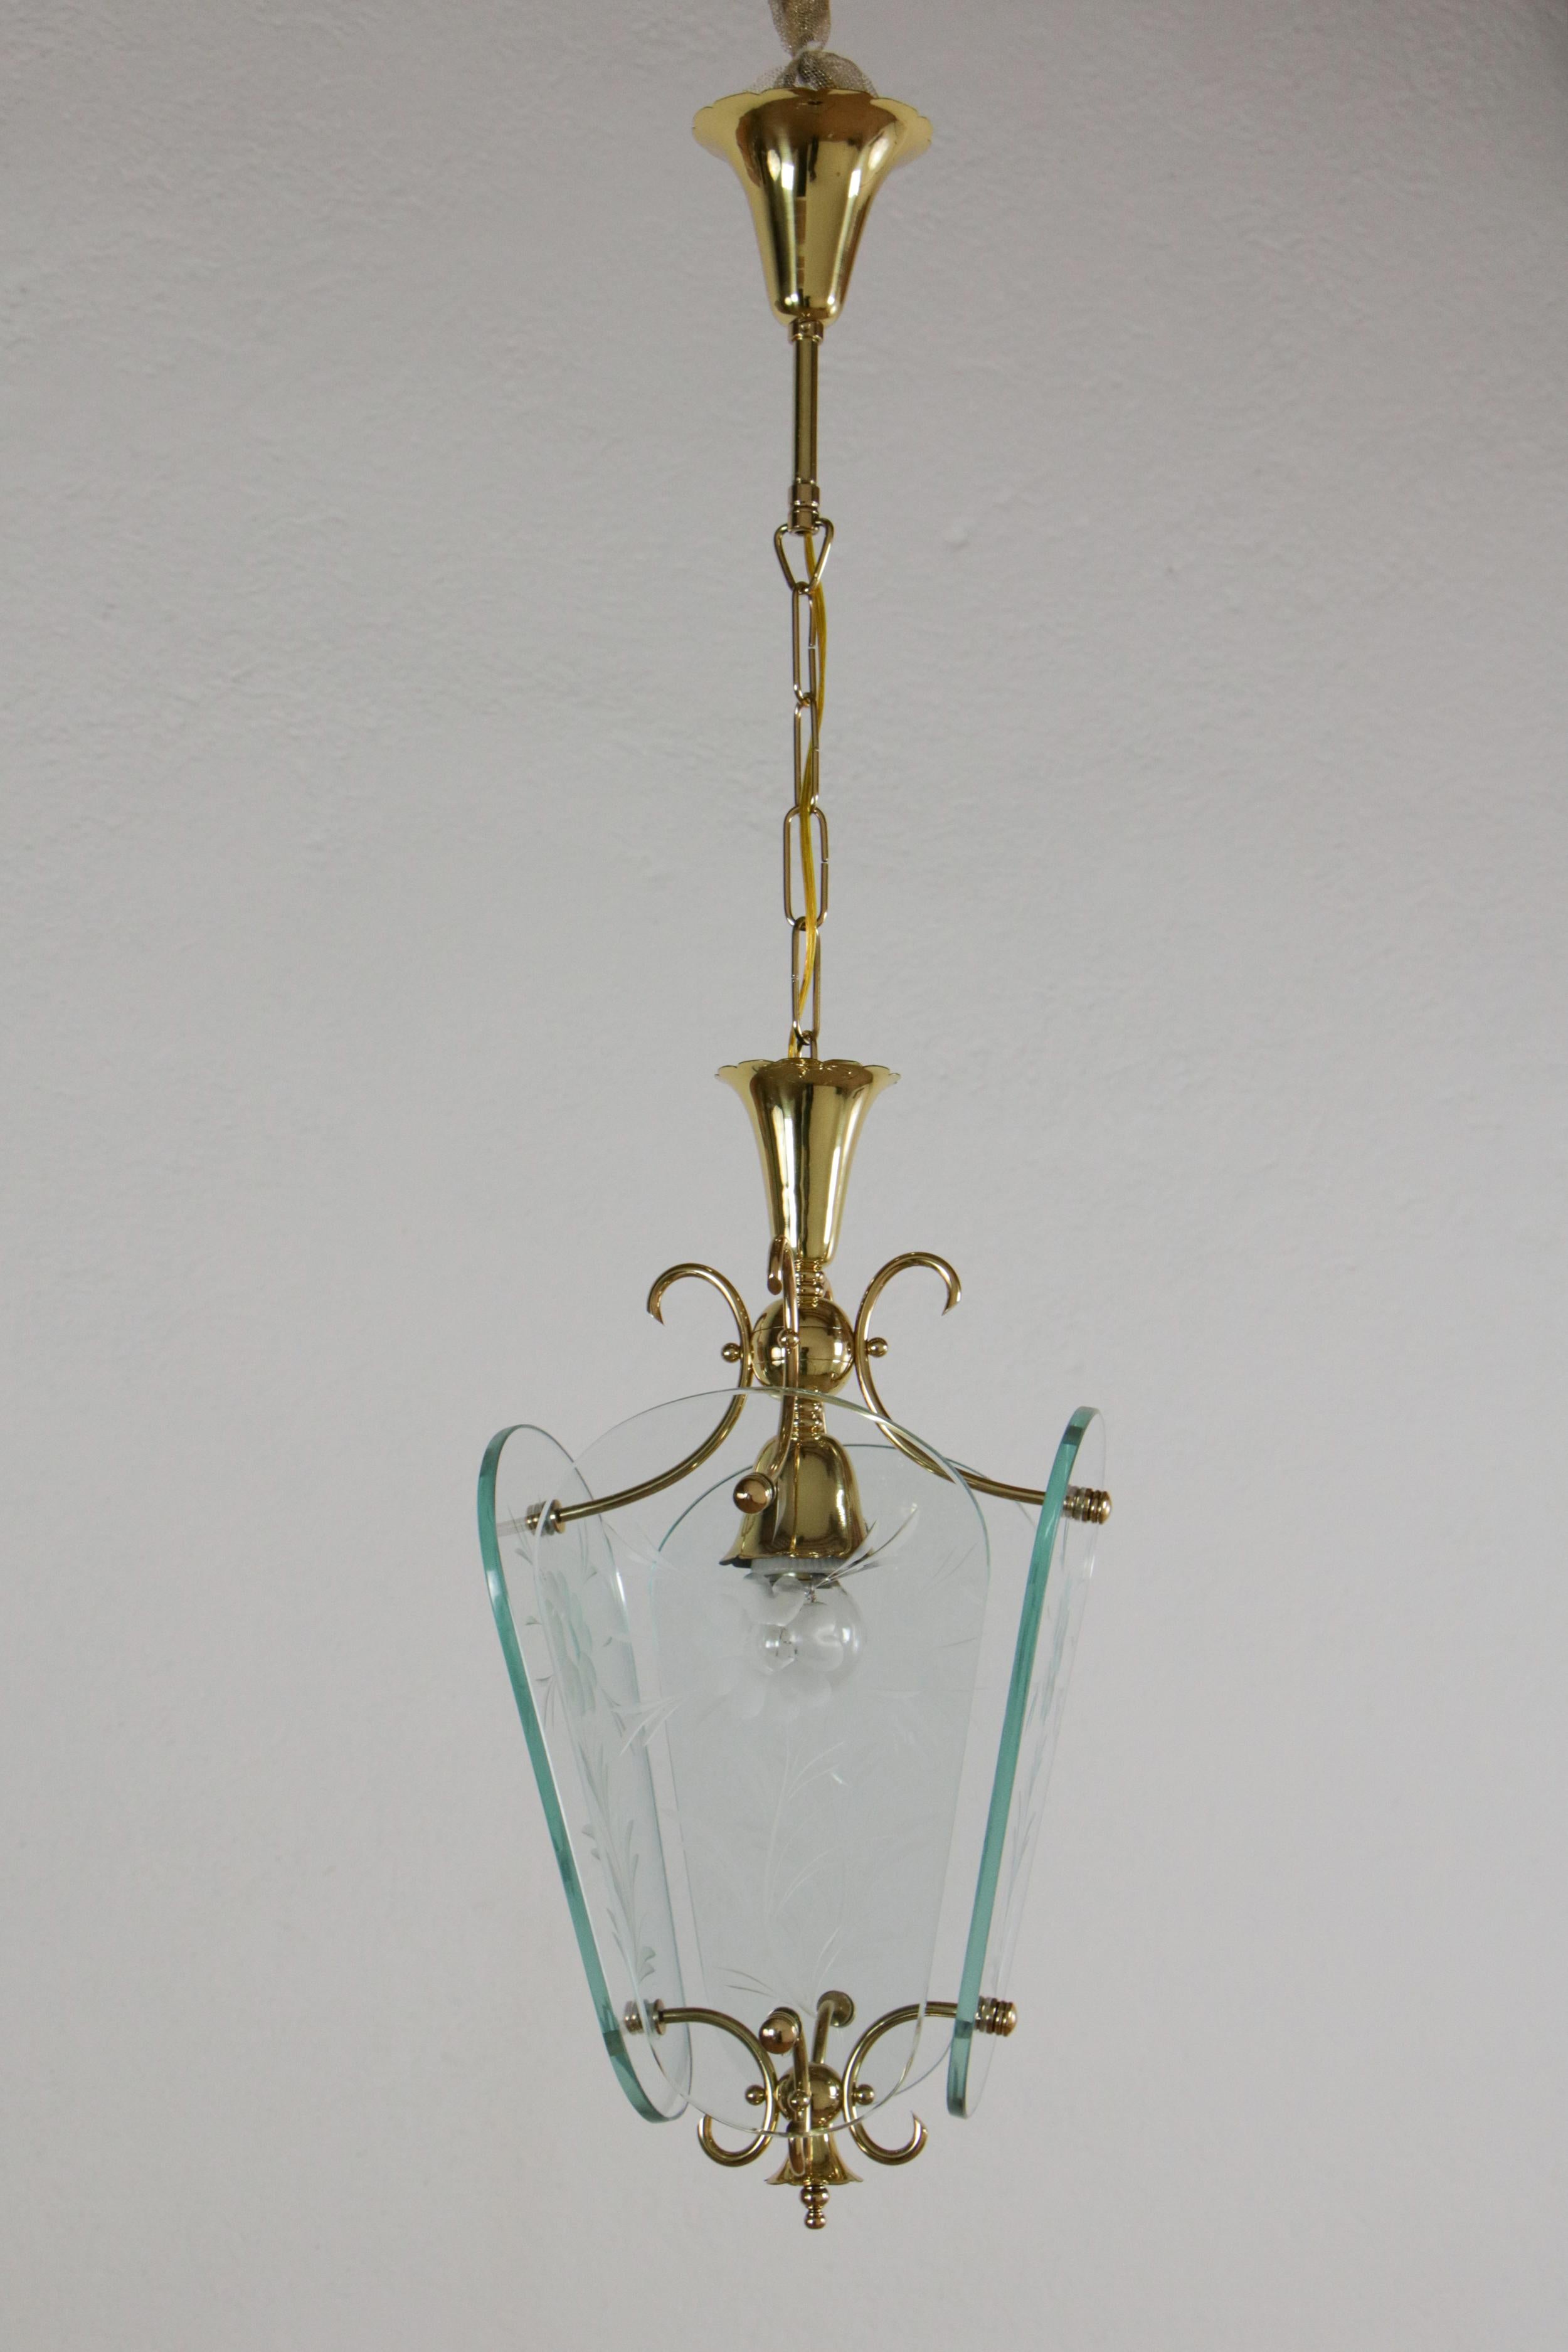 A beautiful Italian mid-century lantern or pendant lamp by Pietro Chiesa for Fontana Arte, brass, 8mm thick crystals, 1 light E27 format, with great executive quality, the brass seems to have been crafted by a goldsmith, not to mention the engraved